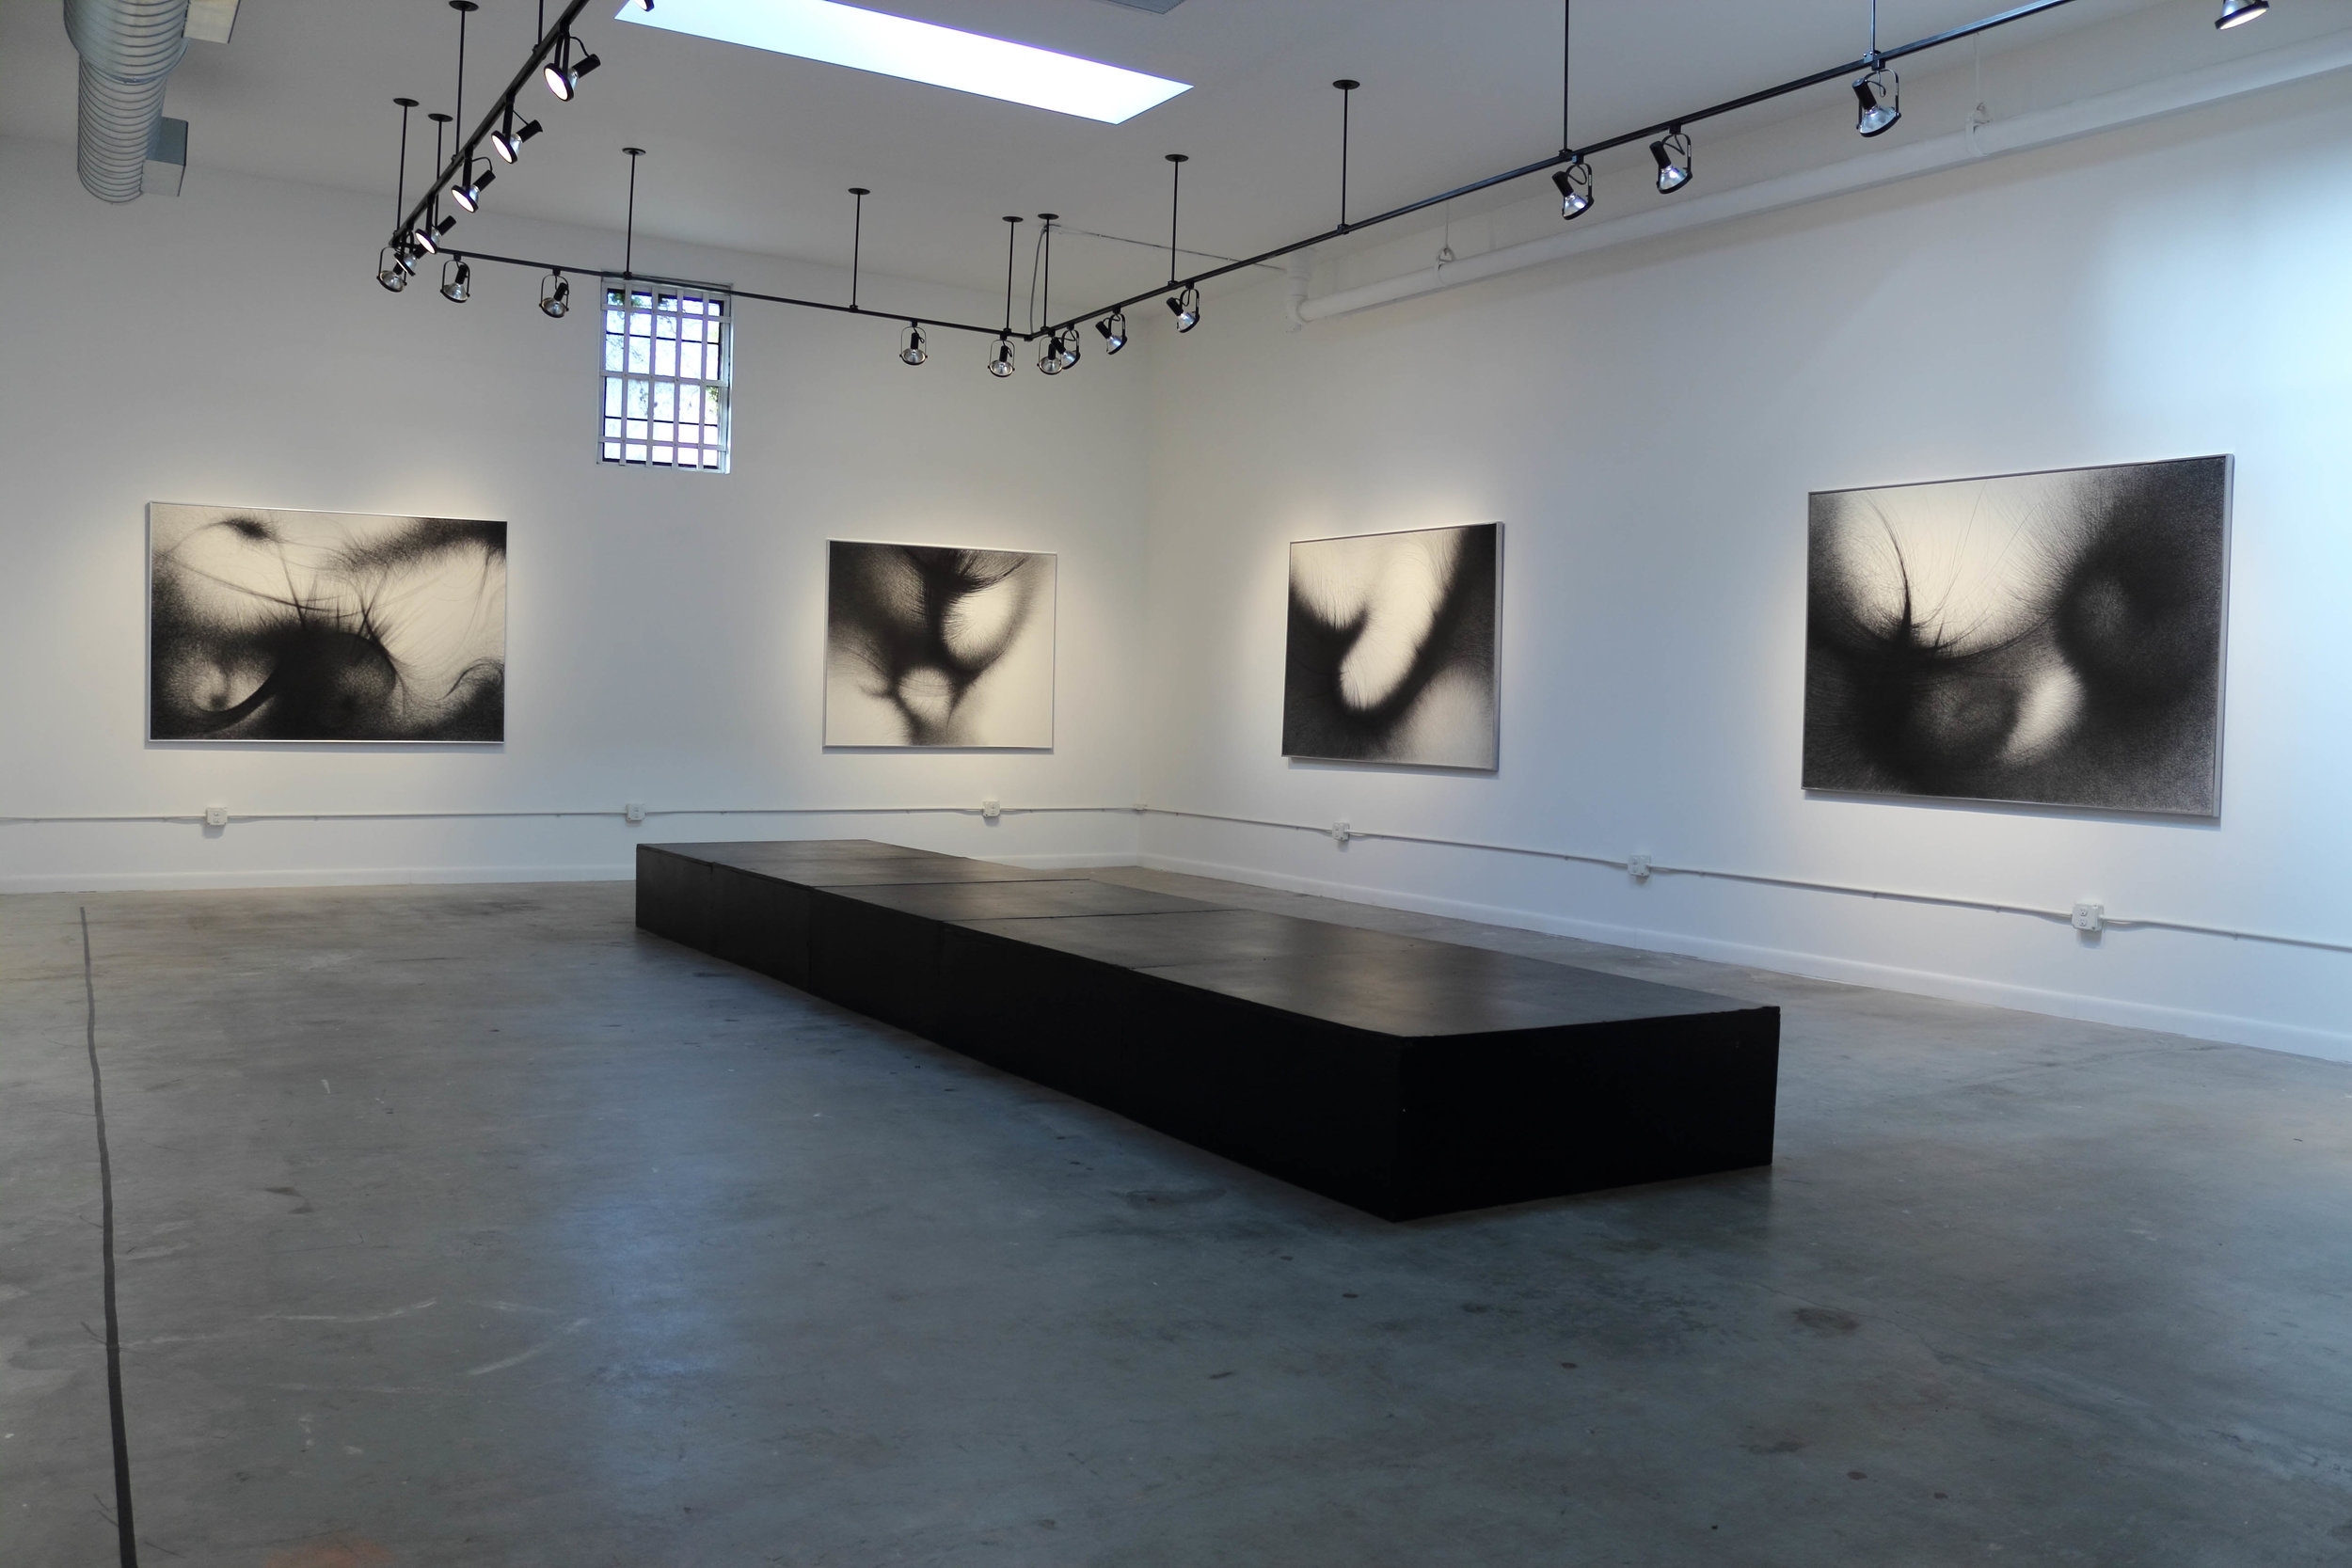  New York, See | Exhibition Space 